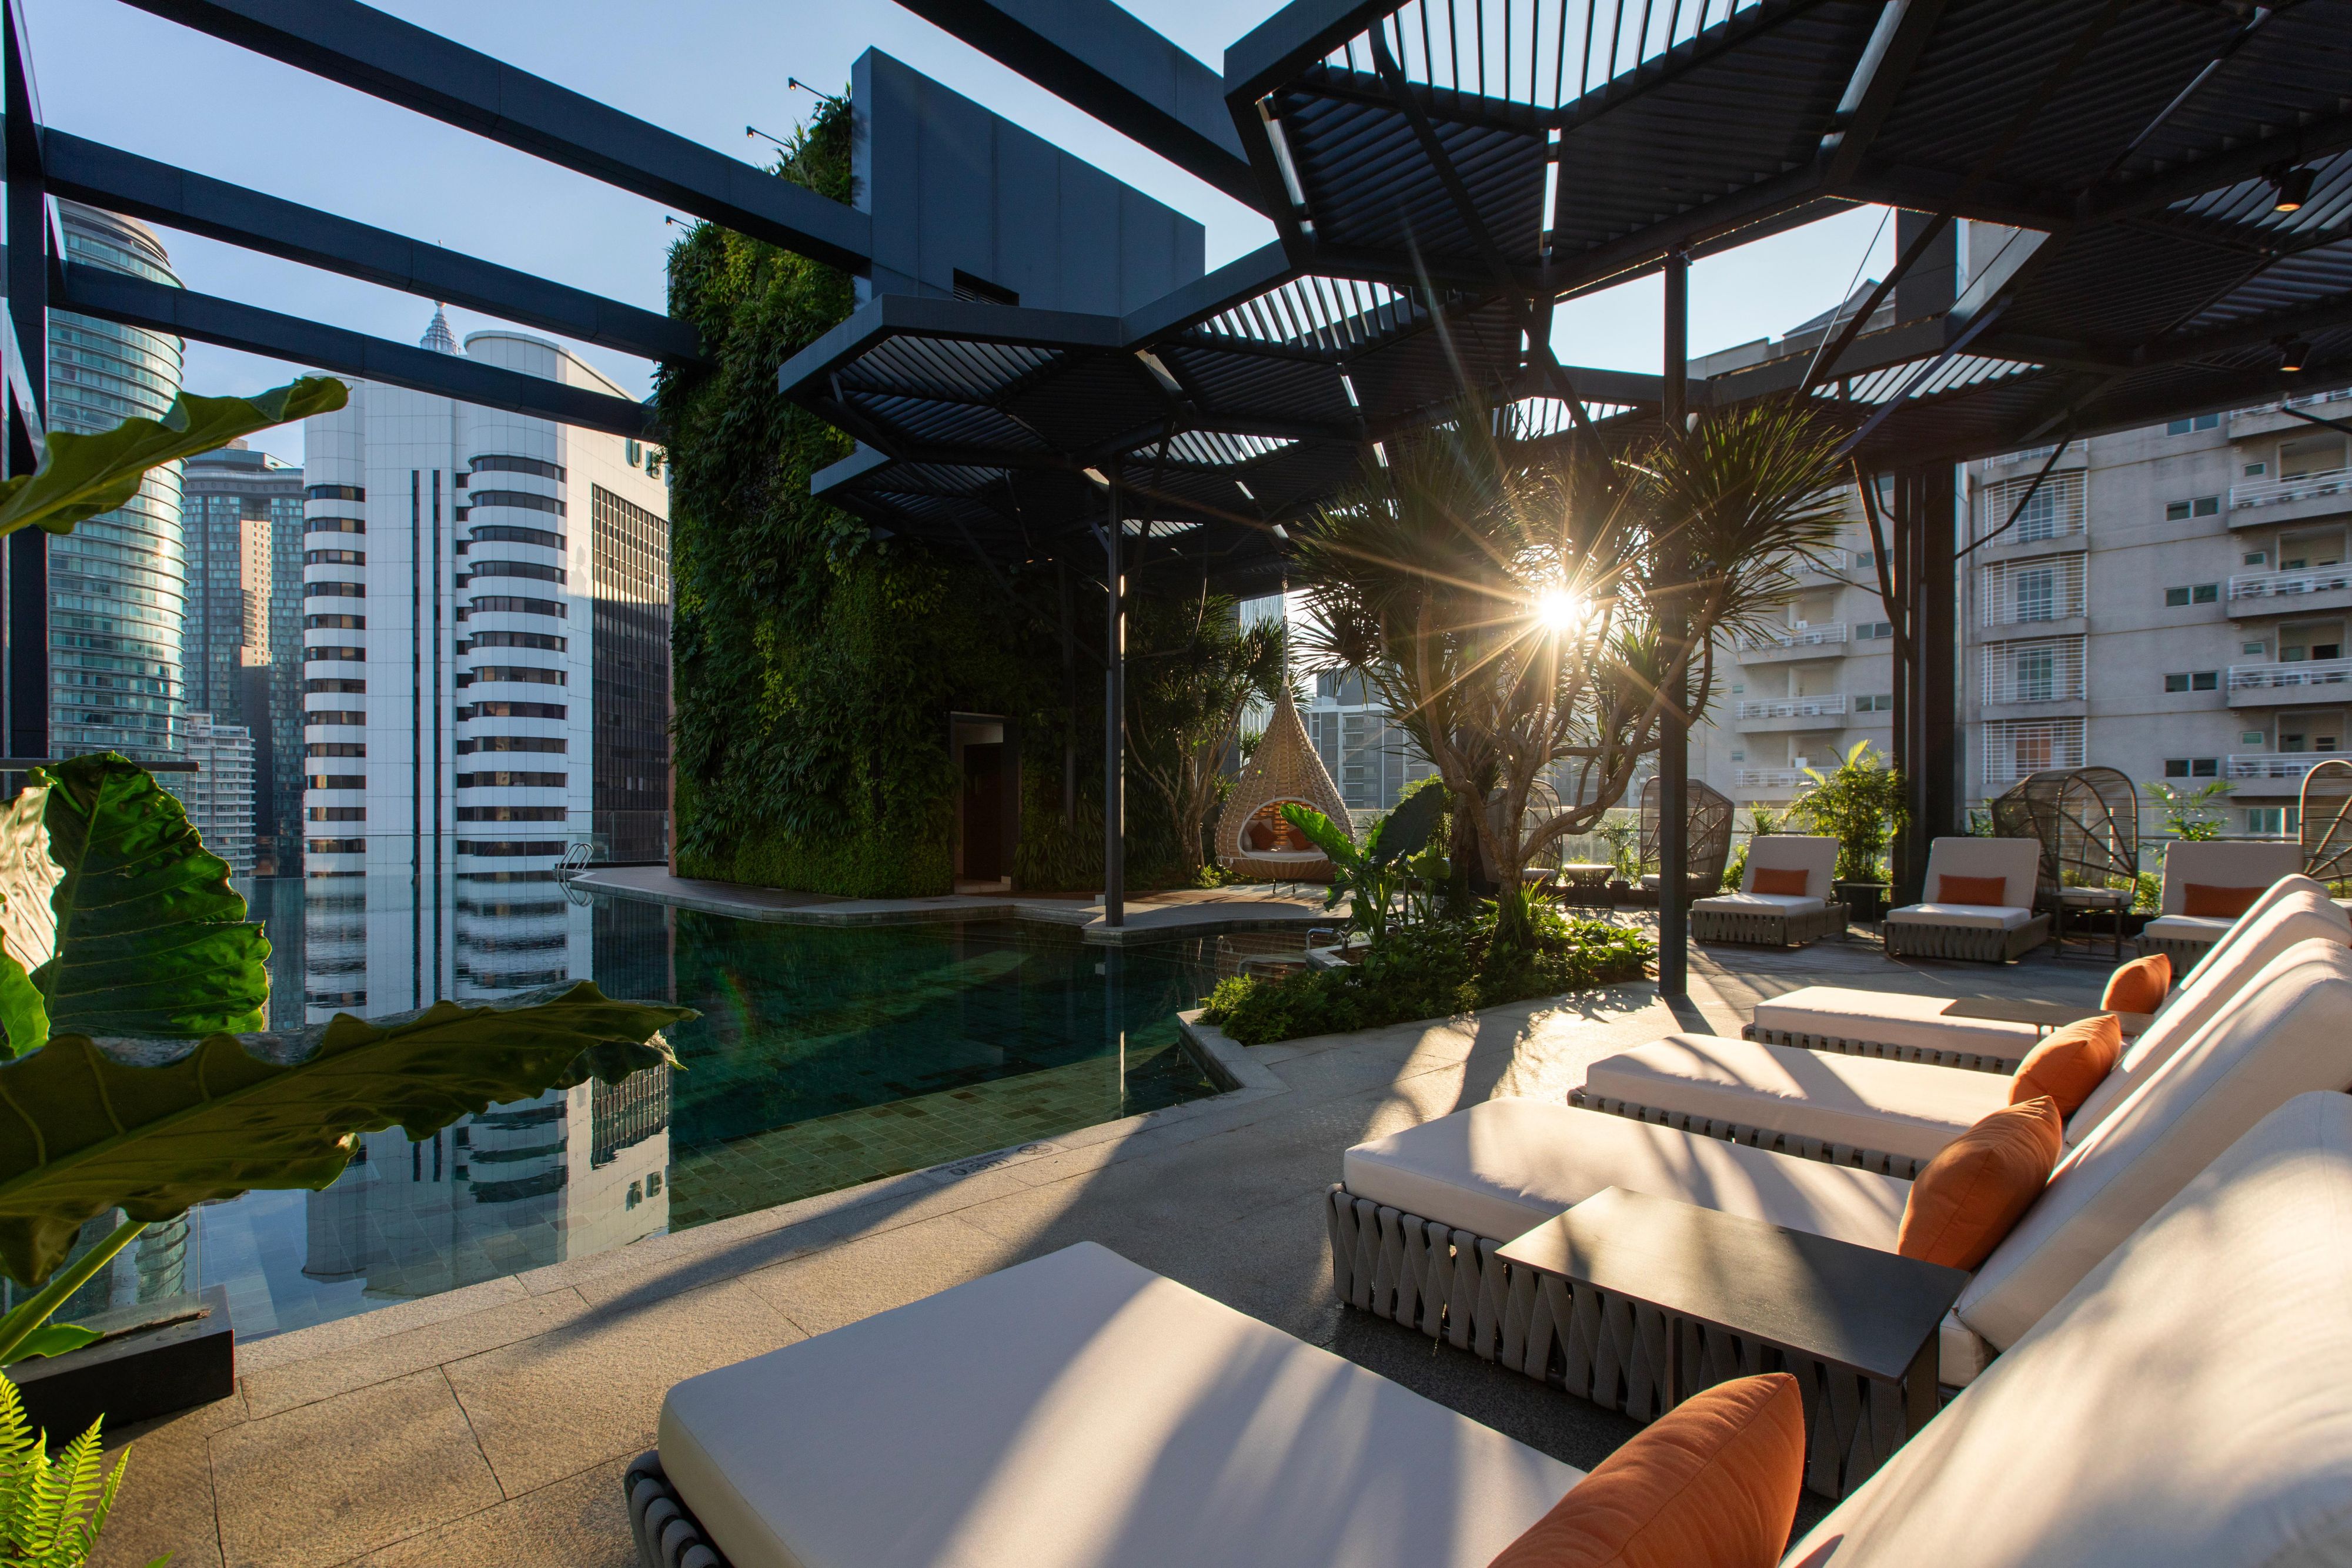 Hotel Indigo in Kuala Lumpur's Golden Triangle, near Bukit Nanas and KL Forest Eco Park, melds urban vibrancy with nature. Close to KLCC and culinary streets like Jalan Alor, it offers eco-friendly luxury with stunning views of the KL Tower and Merdeka 118, perfect for exploring the city's heart.